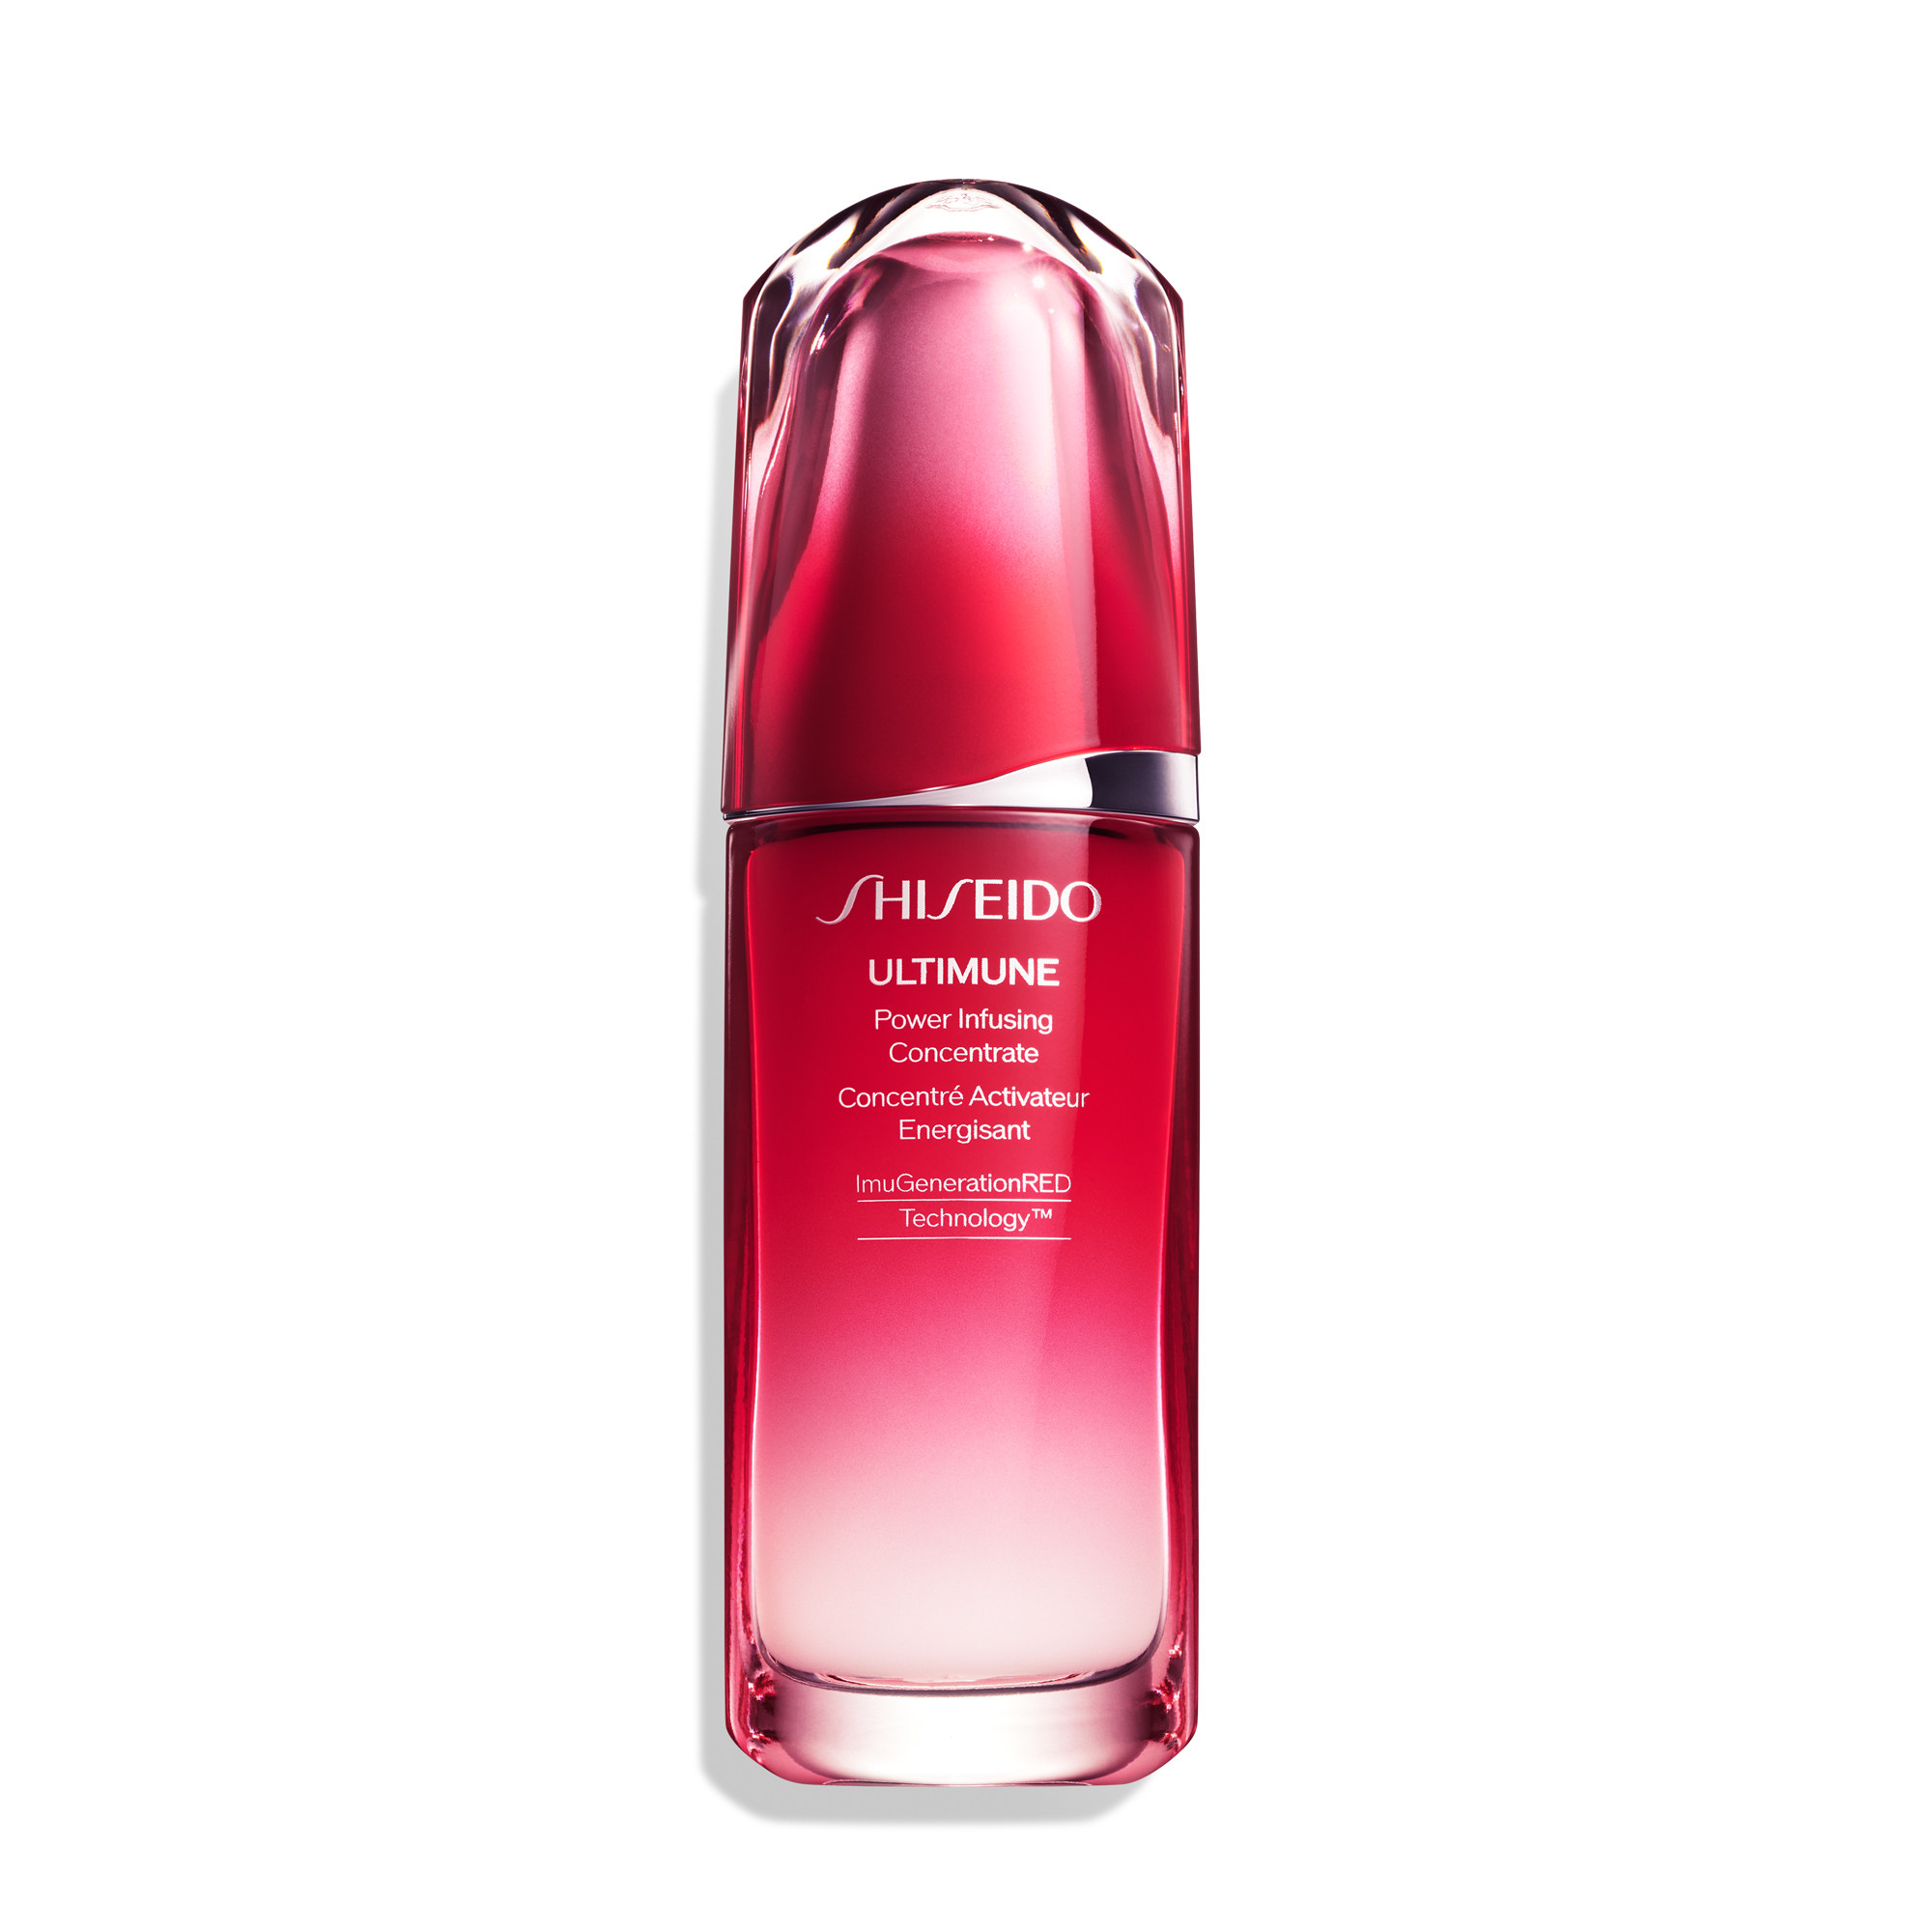 Shiseido concentrate. Shiseido Ultimune Power infusing Concentrate. Ultimune концентрат шисейдо. Ultimune концентрат шисейдо Power infusing. Концентрат для лица Shiseido Ultimune.